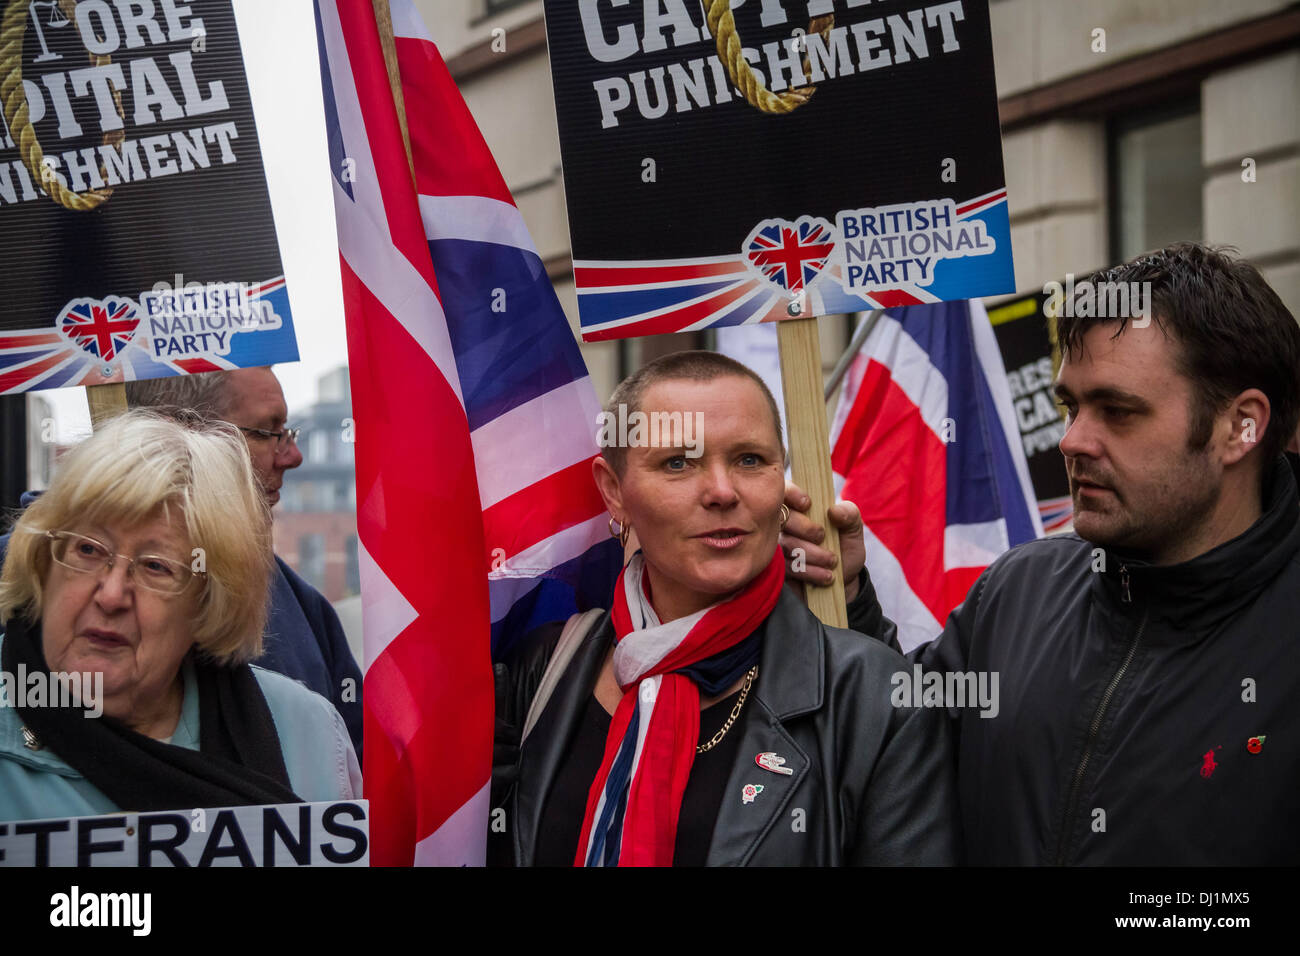 Supporters of the British National Party (BNP) outside Old Bailey court in London Stock Photo